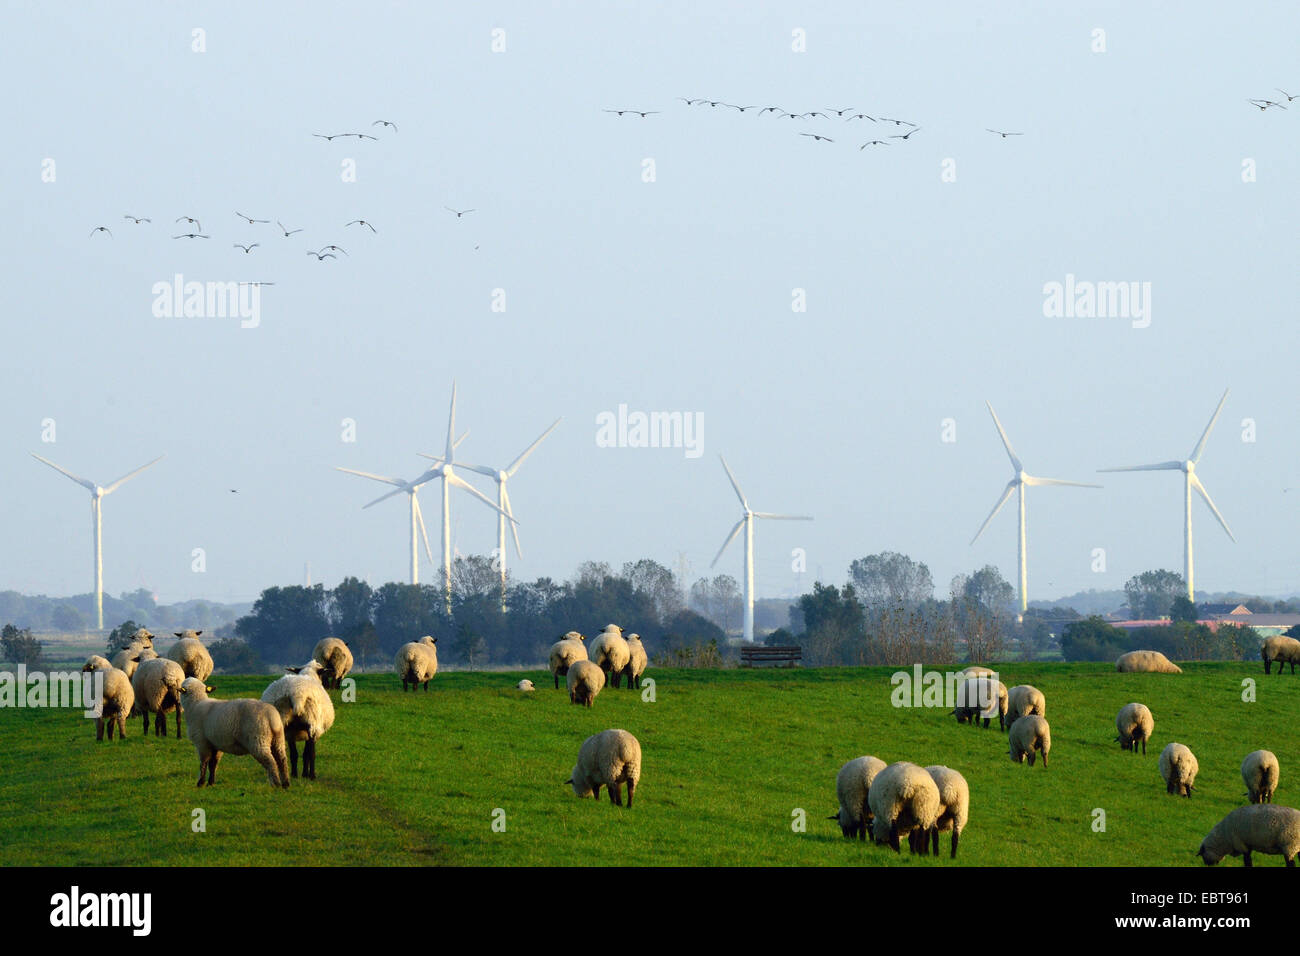 flock of sheep, wind wheels in the background and wild geese in the sky, Germany, Lower Saxony Stock Photo